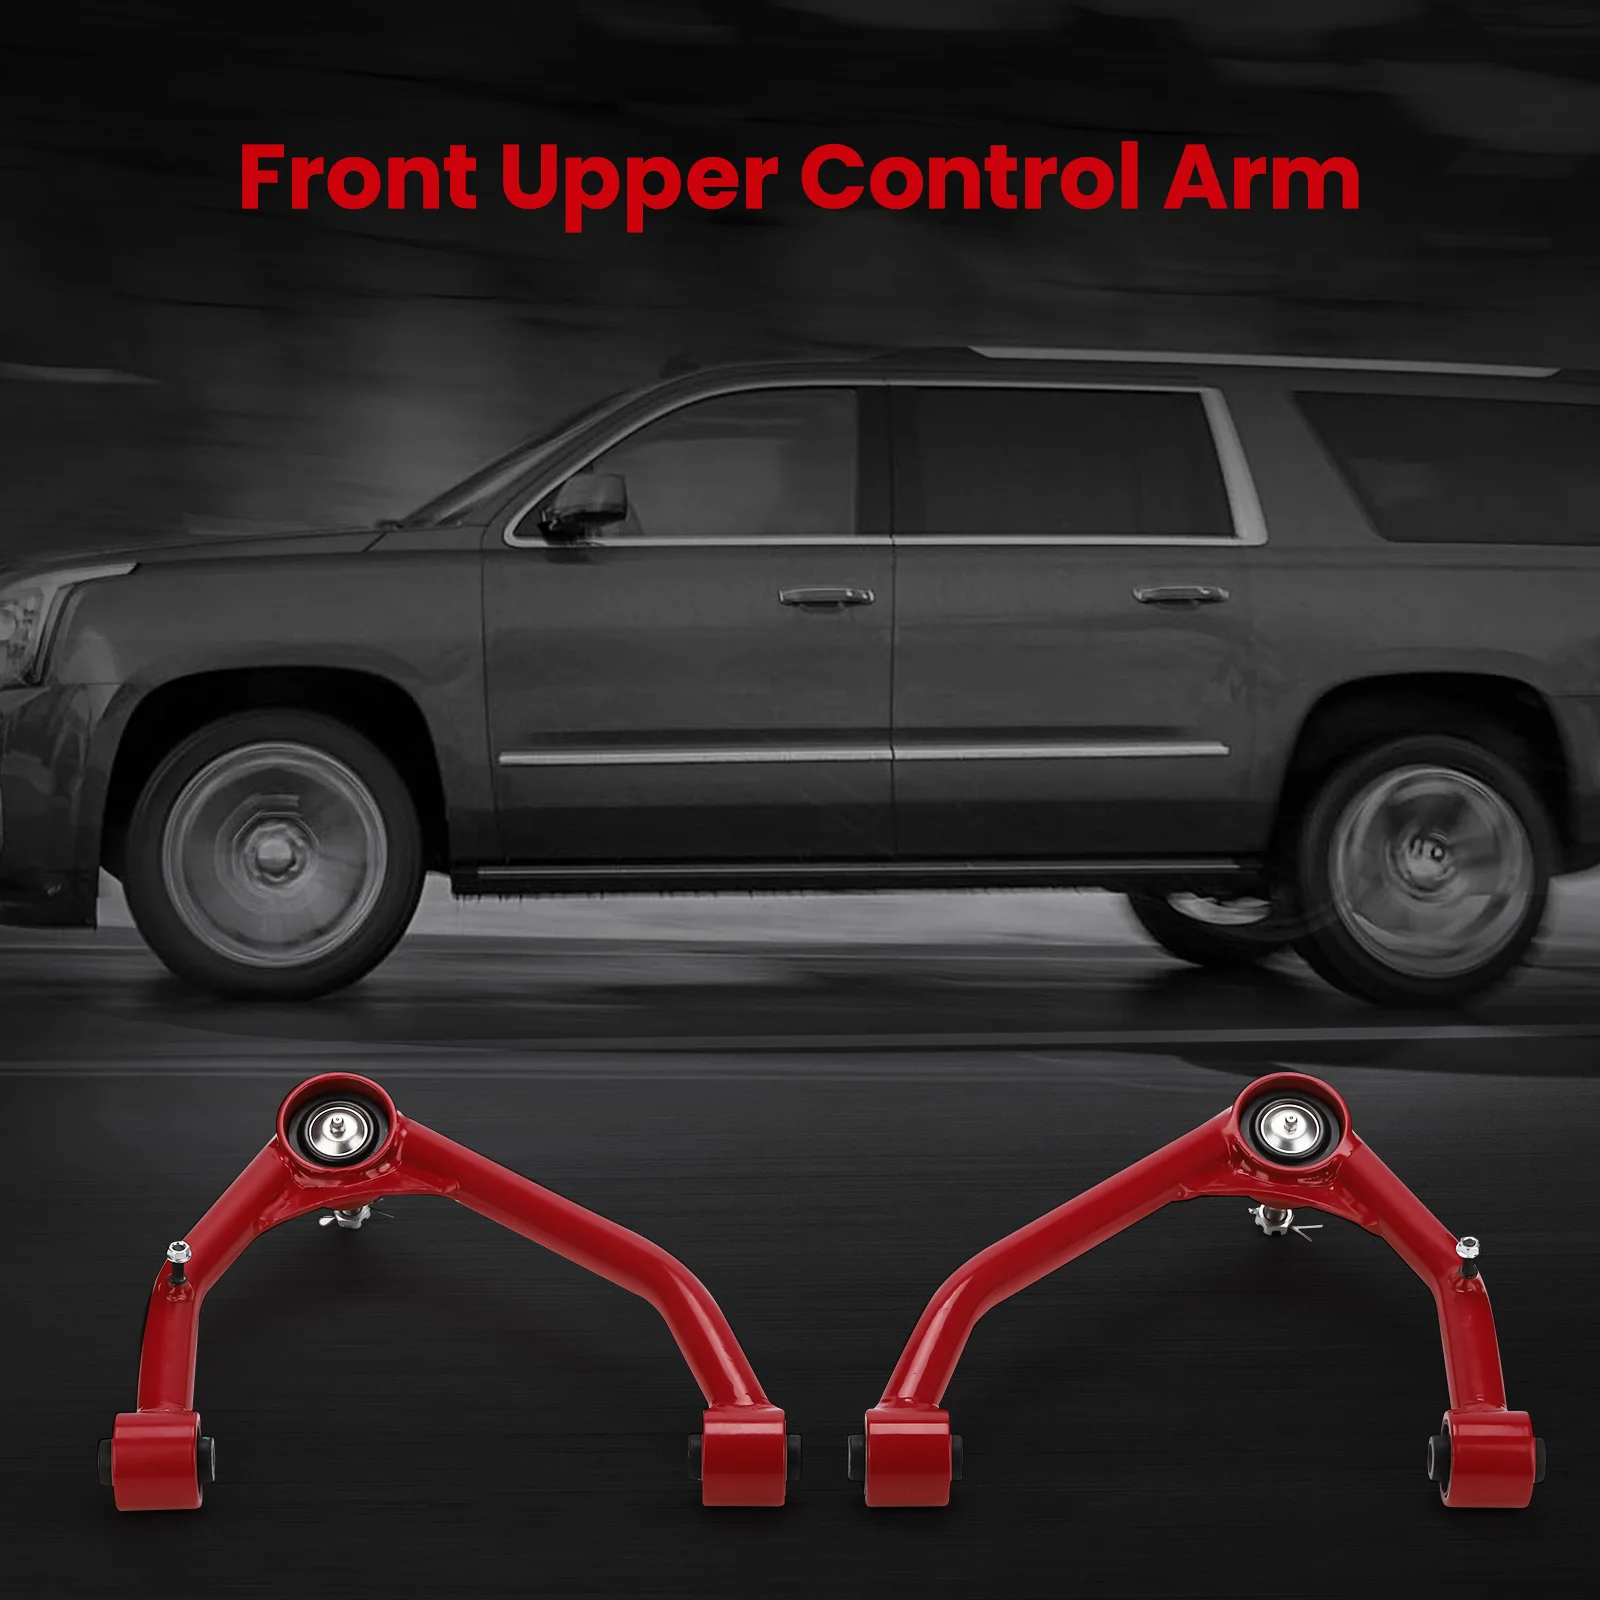 

2x A-Arms Front Upper Control Arms For Chevrolet Avalanche 1500 2007-2015 2WD 4WD 6-lug W/ Bushings